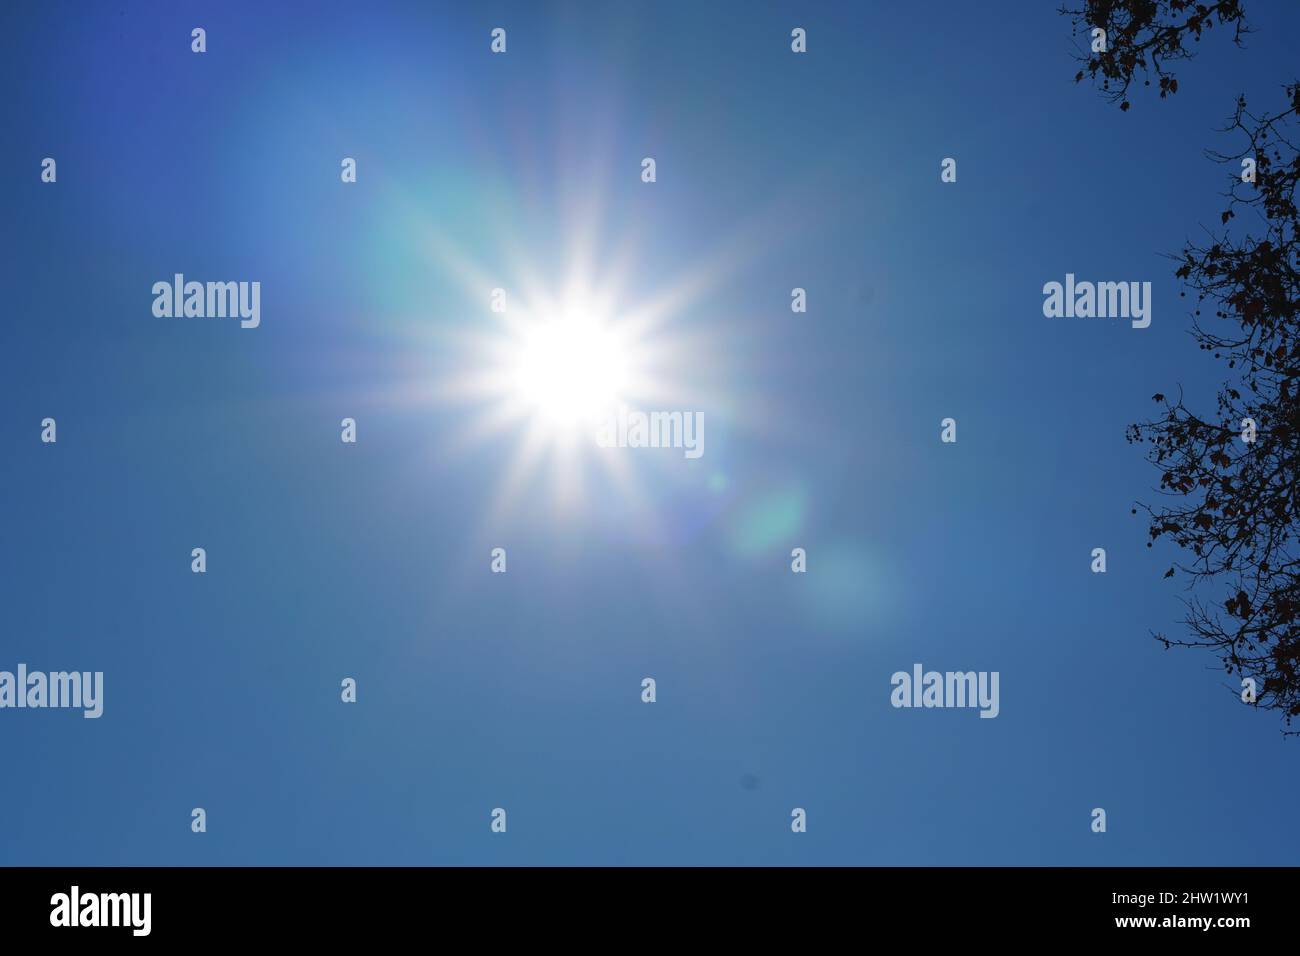 direct sunlight stretching from the sun, against the background of a dark blue sky Stock Photo